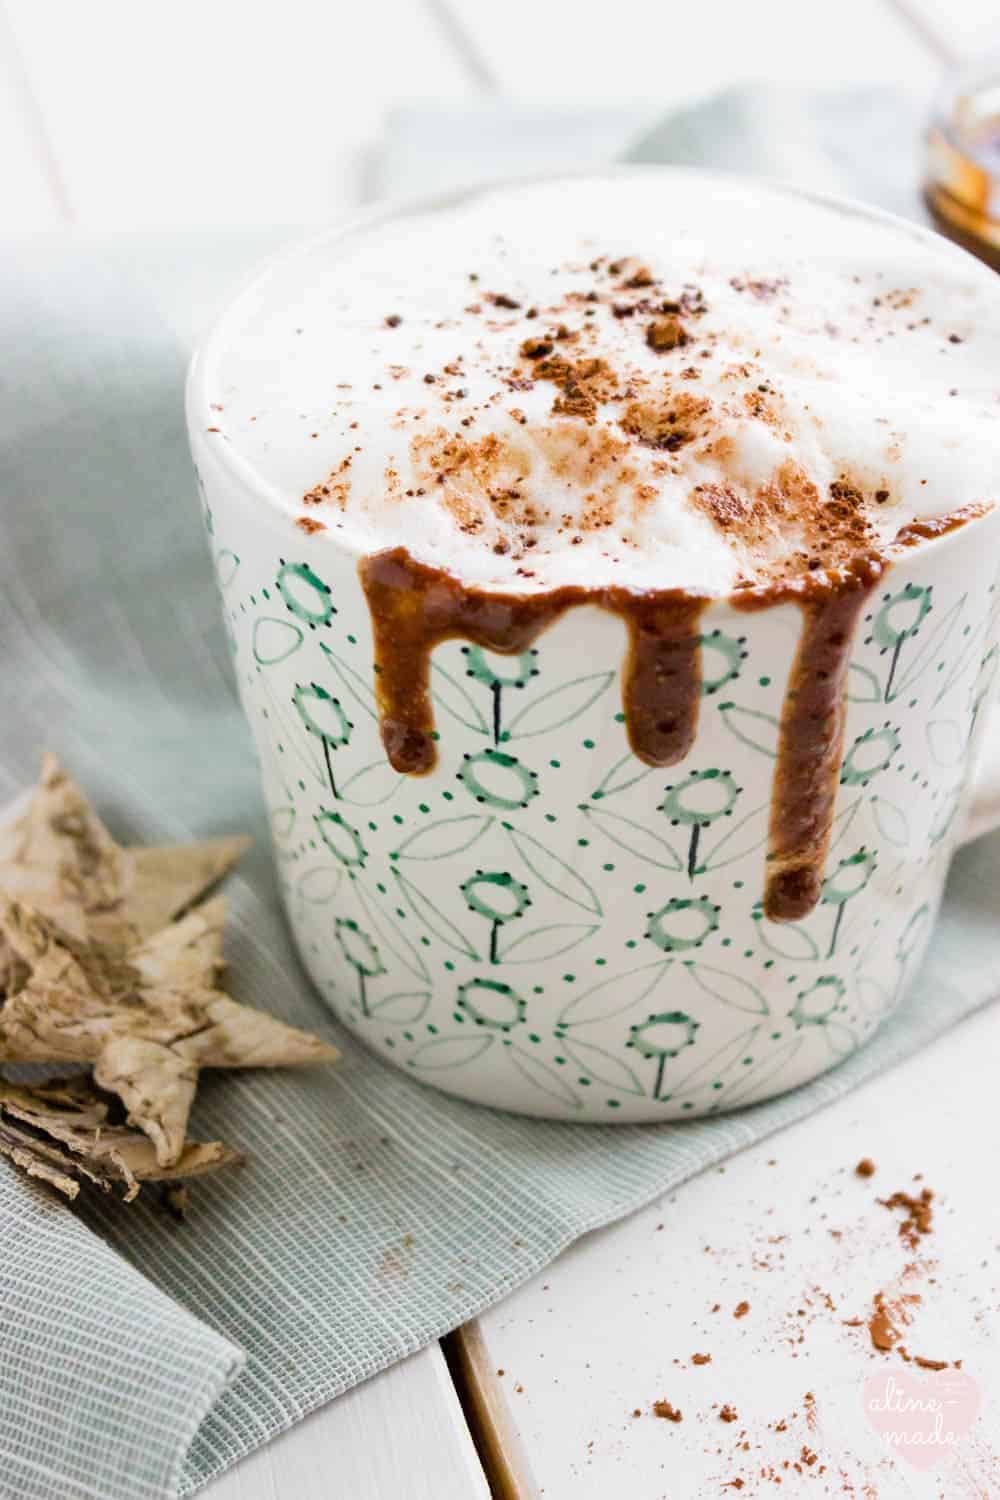 Nutella Cappuccino - Topped with milk foam and cacao powder